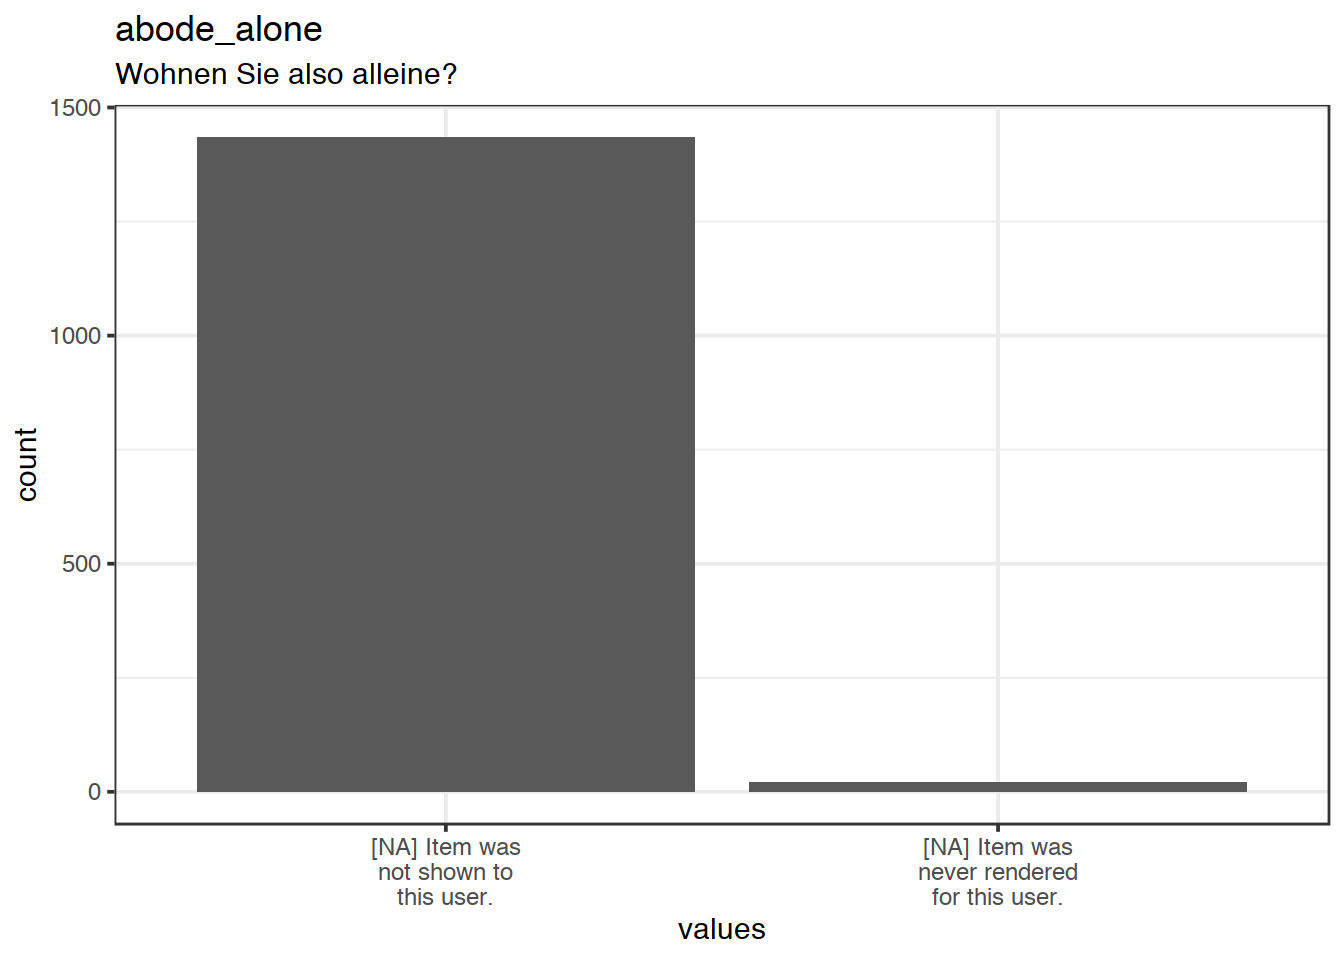 Plot of missing values for abode_alone